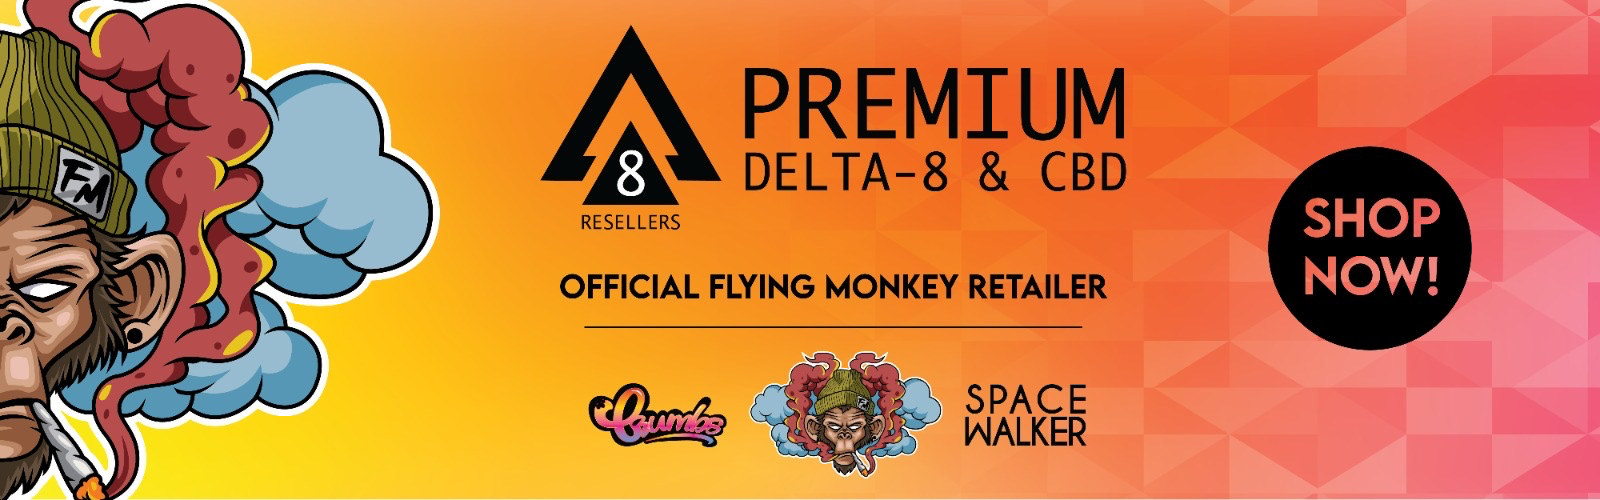 Delta 8 Resellers is the official retailer of Flying Monkey Products